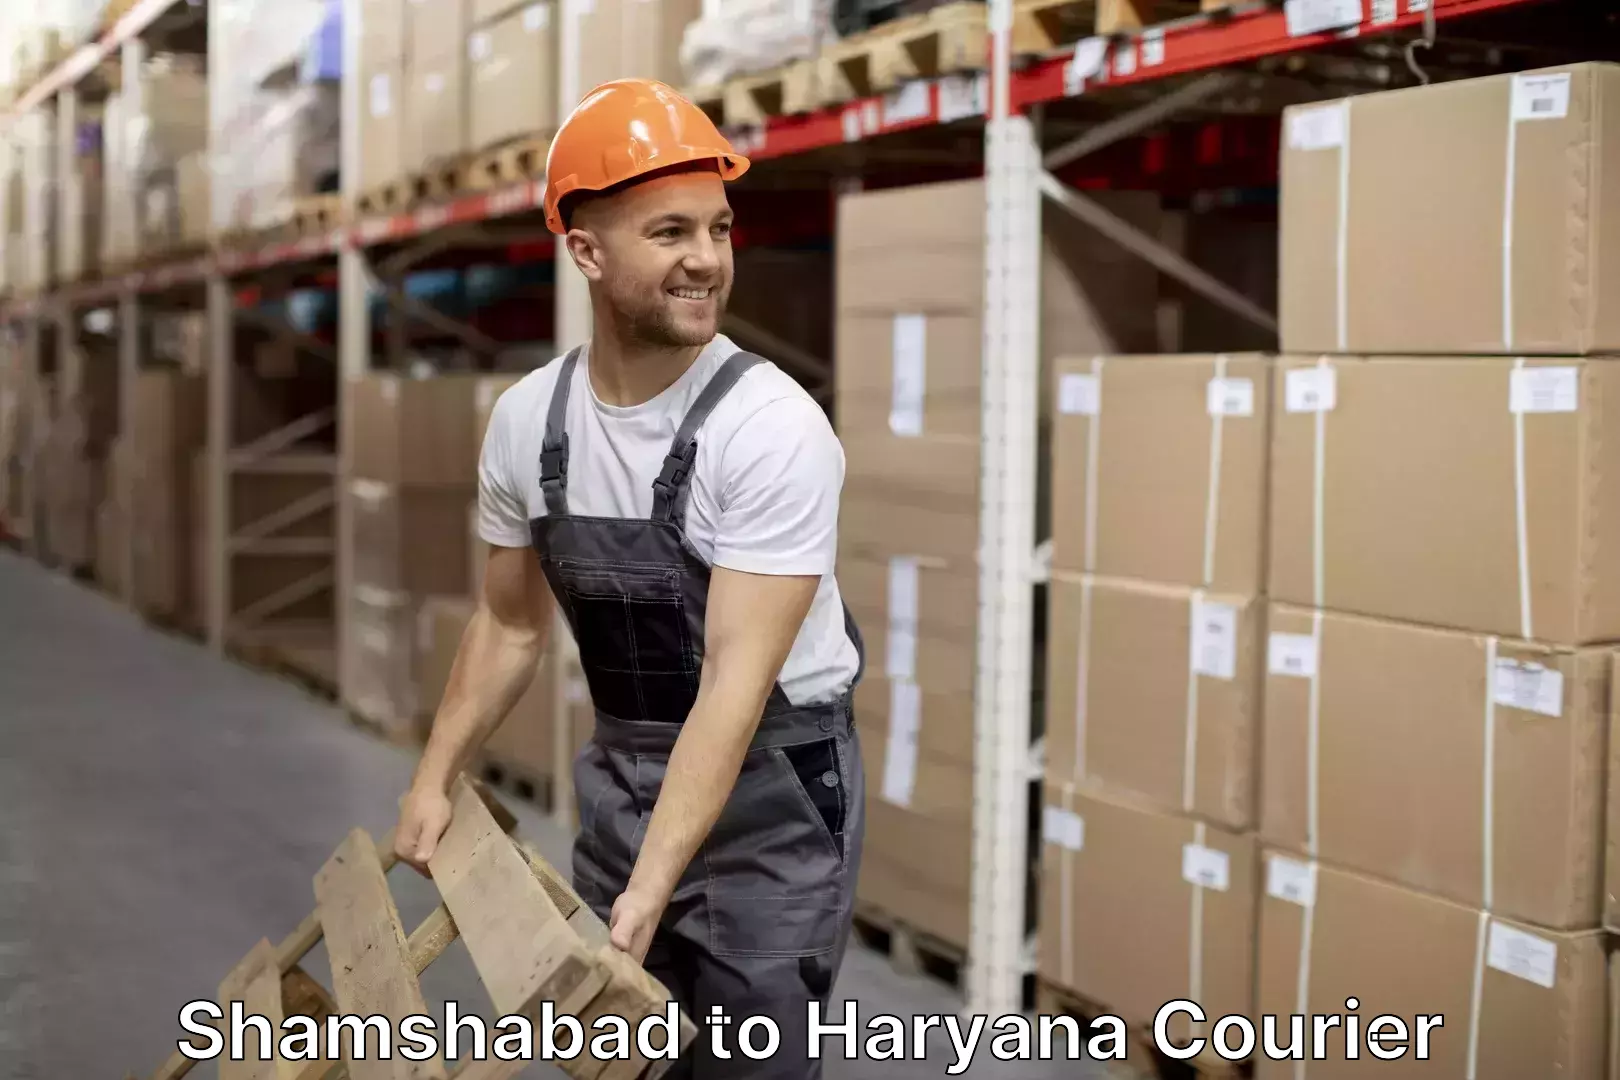 Trusted relocation experts Shamshabad to Haryana